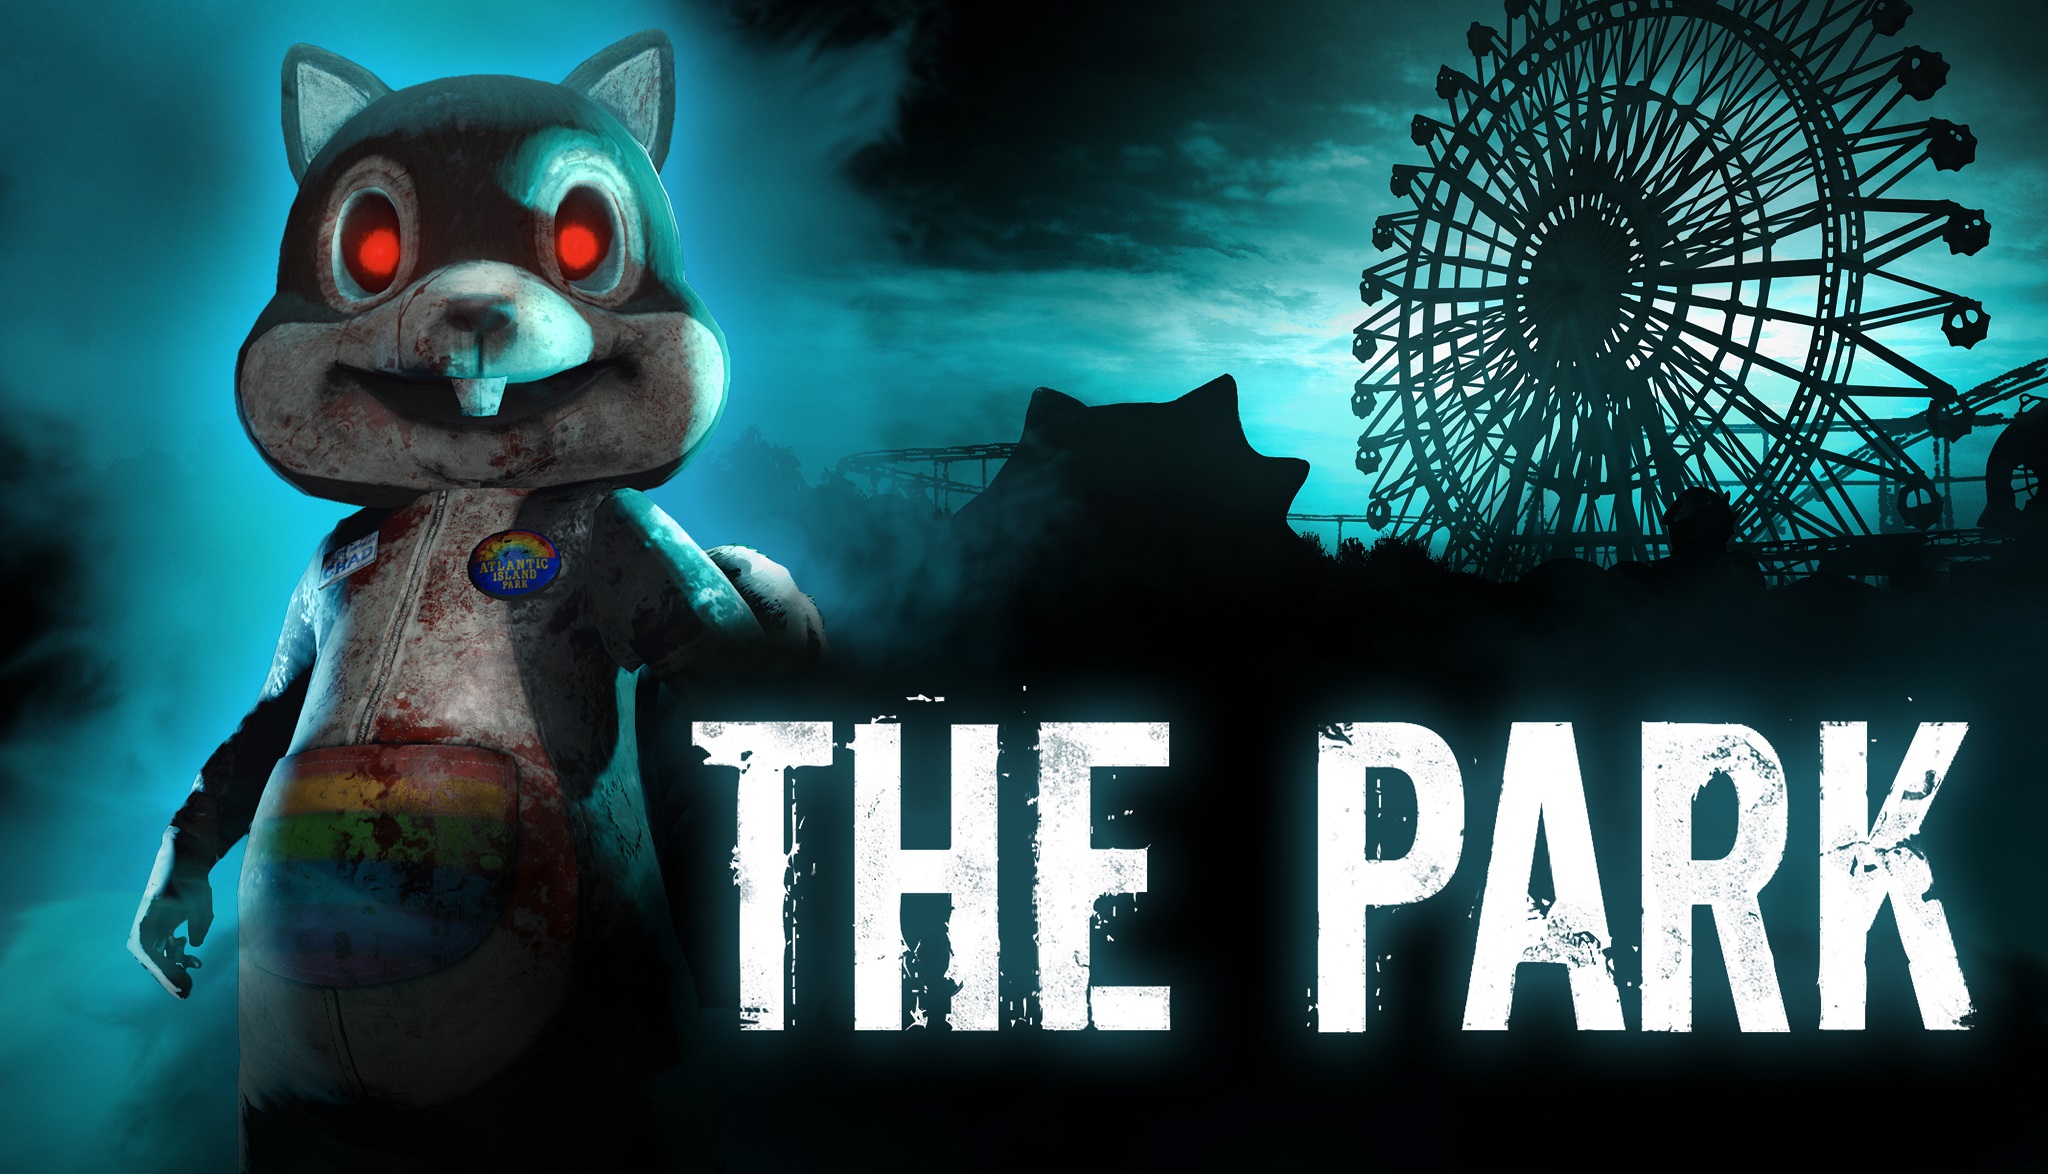 Creepy Experimental Game The Park Release Date Set in Time for Halloween